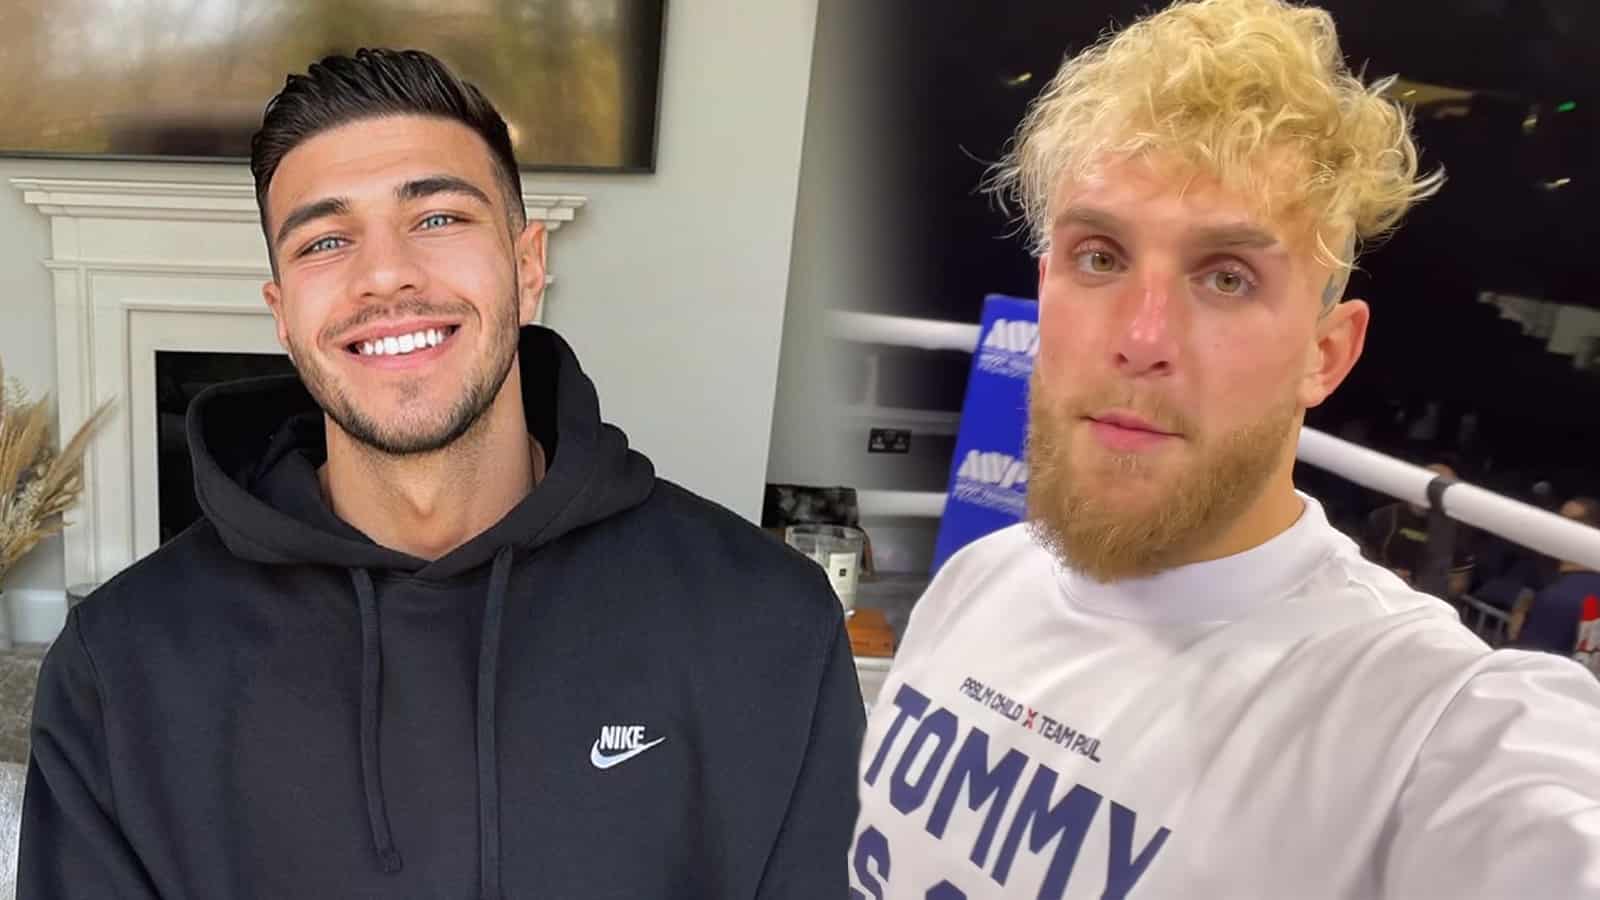 Tommy Fury smiling next to Jake Paul in boxing ring